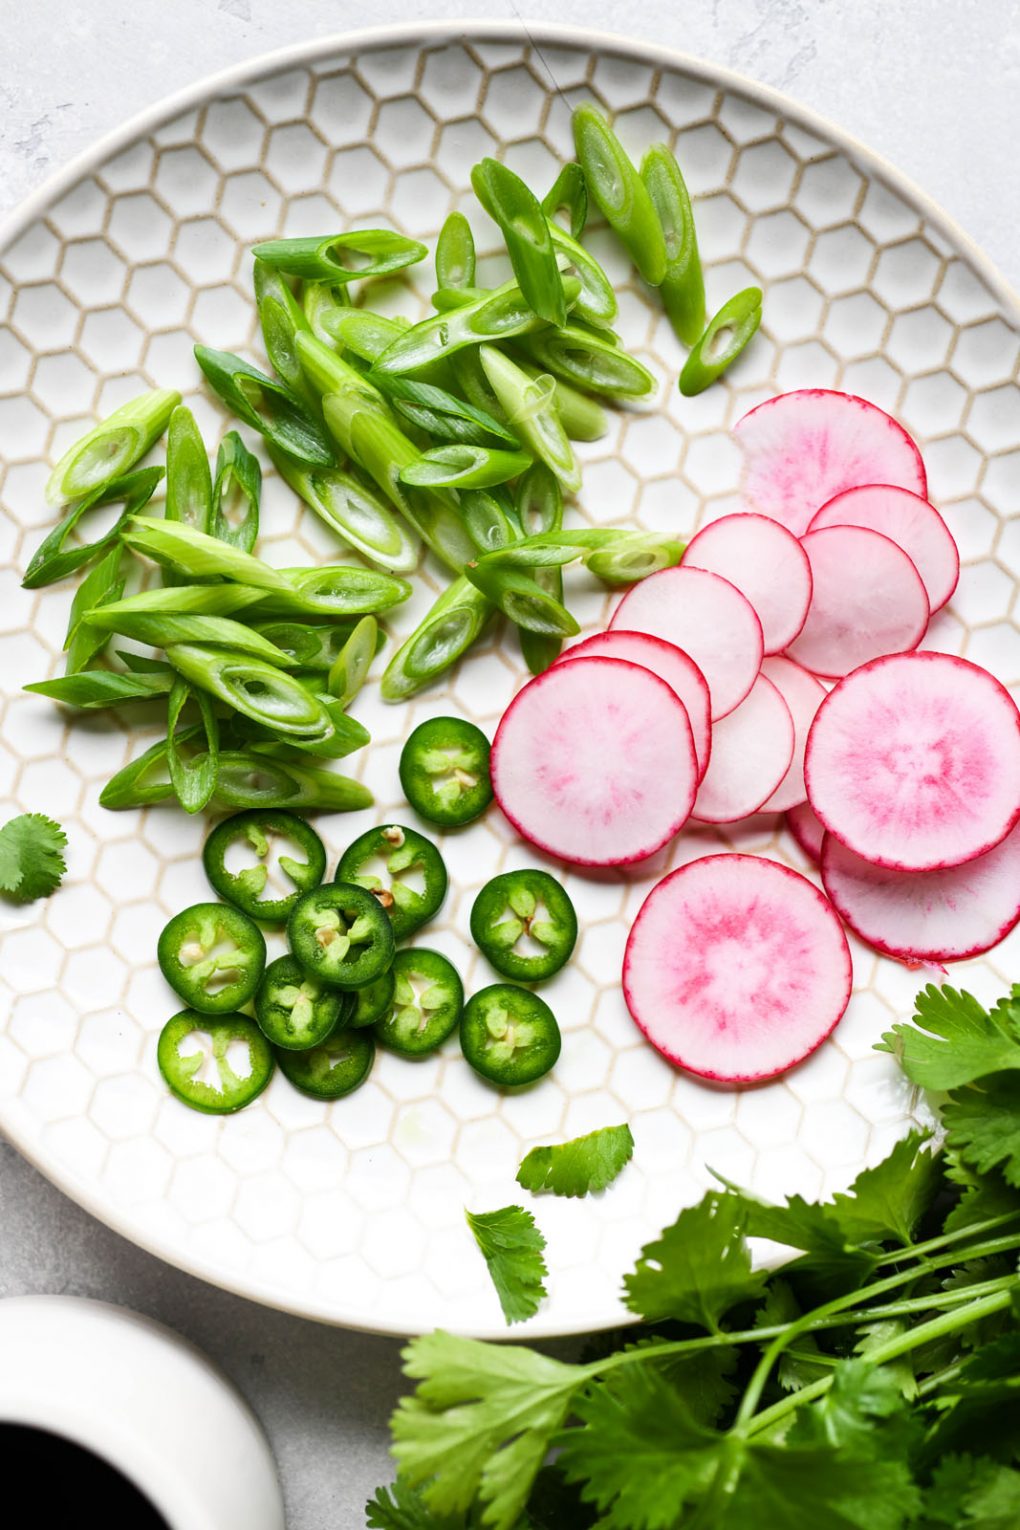 Super close up image of soup garnishes on a light colored textured plate. Thinly sliced radishes, jalapeno, green onions, and cilantro peeking into the corner of the frame. 